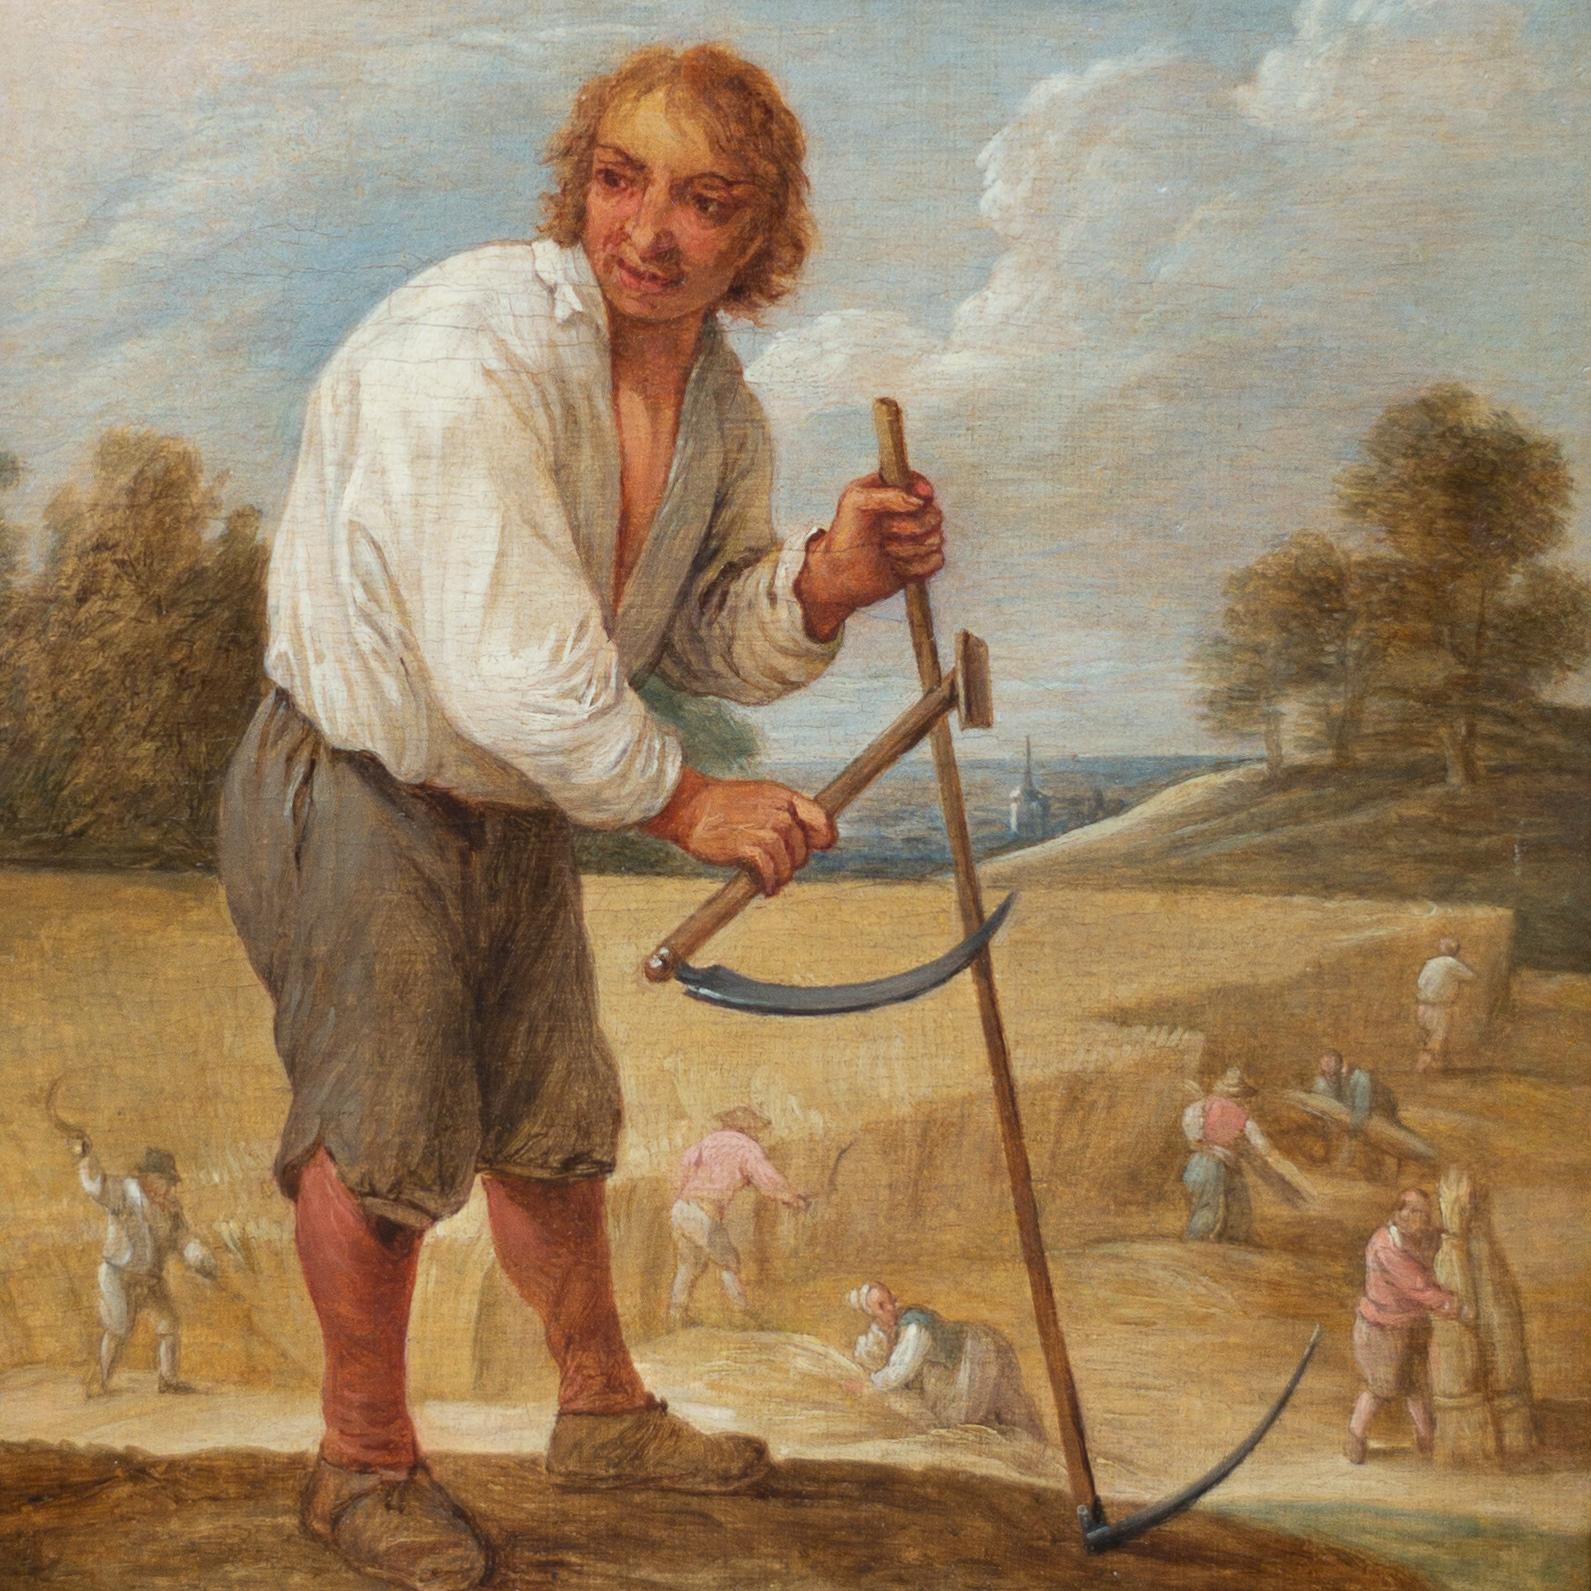 Remembering the magic of everyday life moments in the art of David Teniers:

The art of David Teniers the Younger (1610–1690) coincided with the heyday of the Flemish Baroque and captured a great variety of motifs of his time. In this painting of a